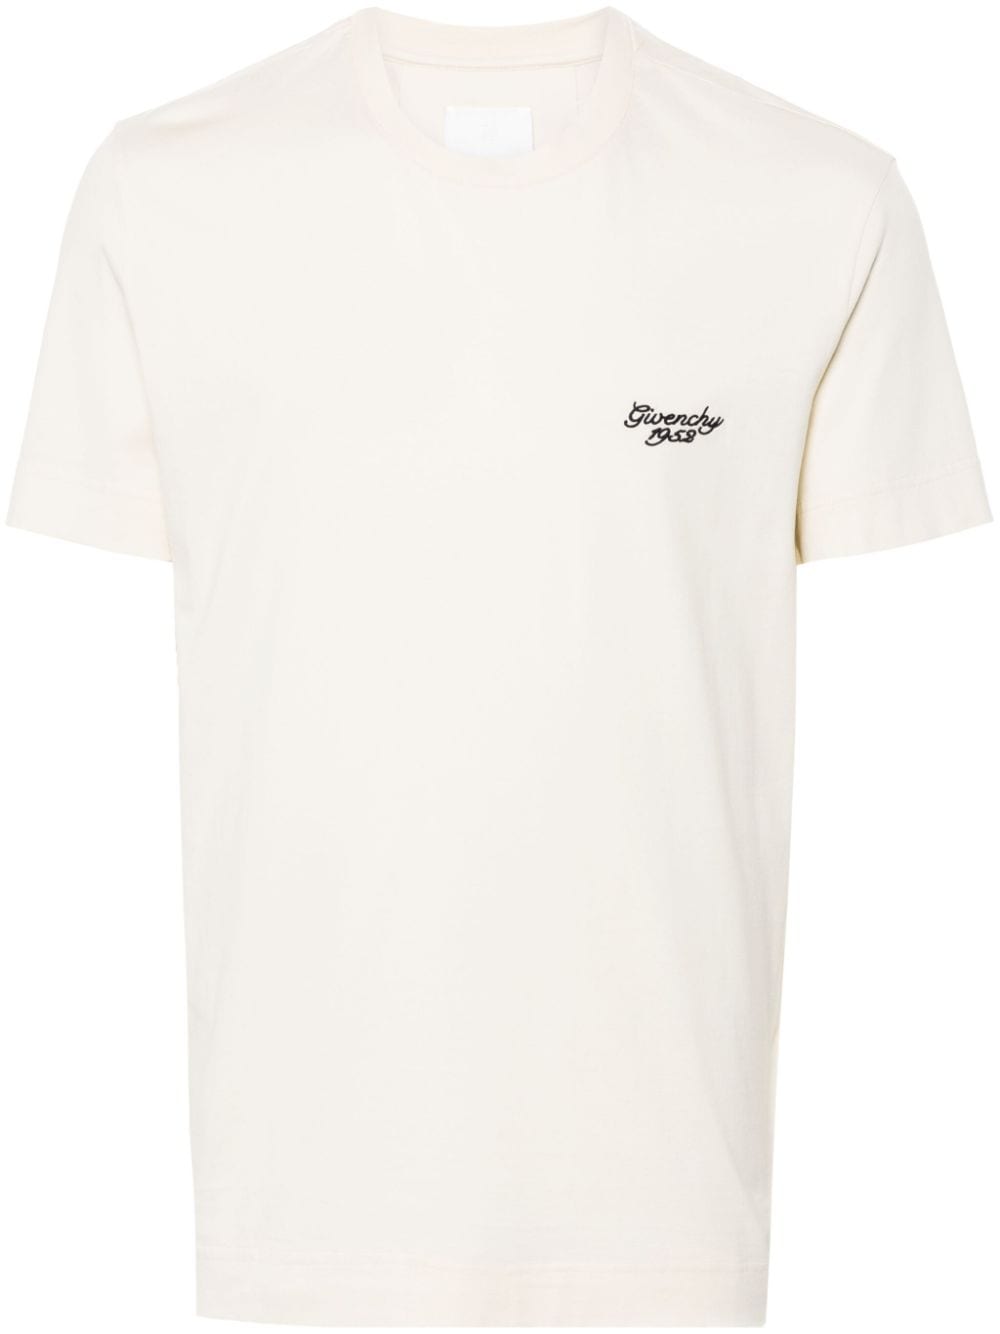 Givenchy GIVENCHY cotton t-shirt - Neutrals von Givenchy